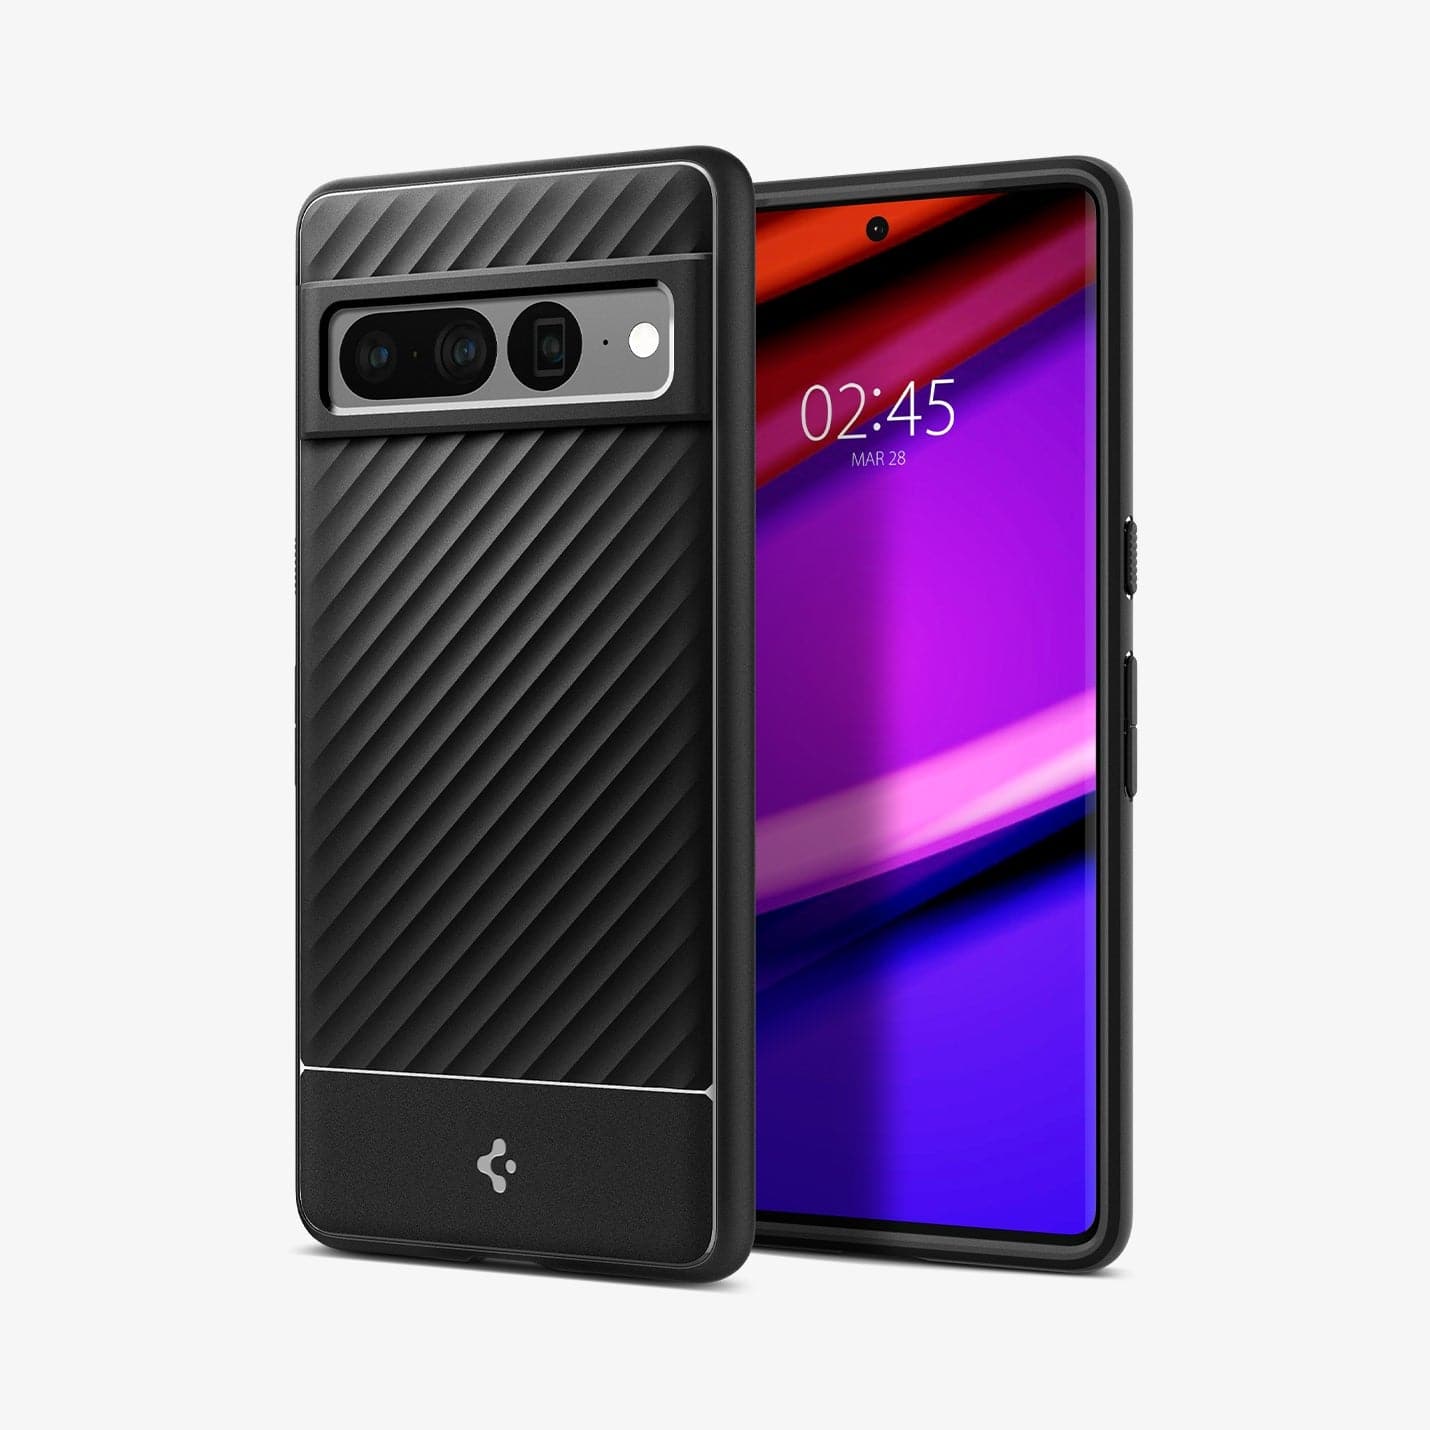 ACS04735 - Pixel 7 Pro Case Core Armor in matte black showing the back and front